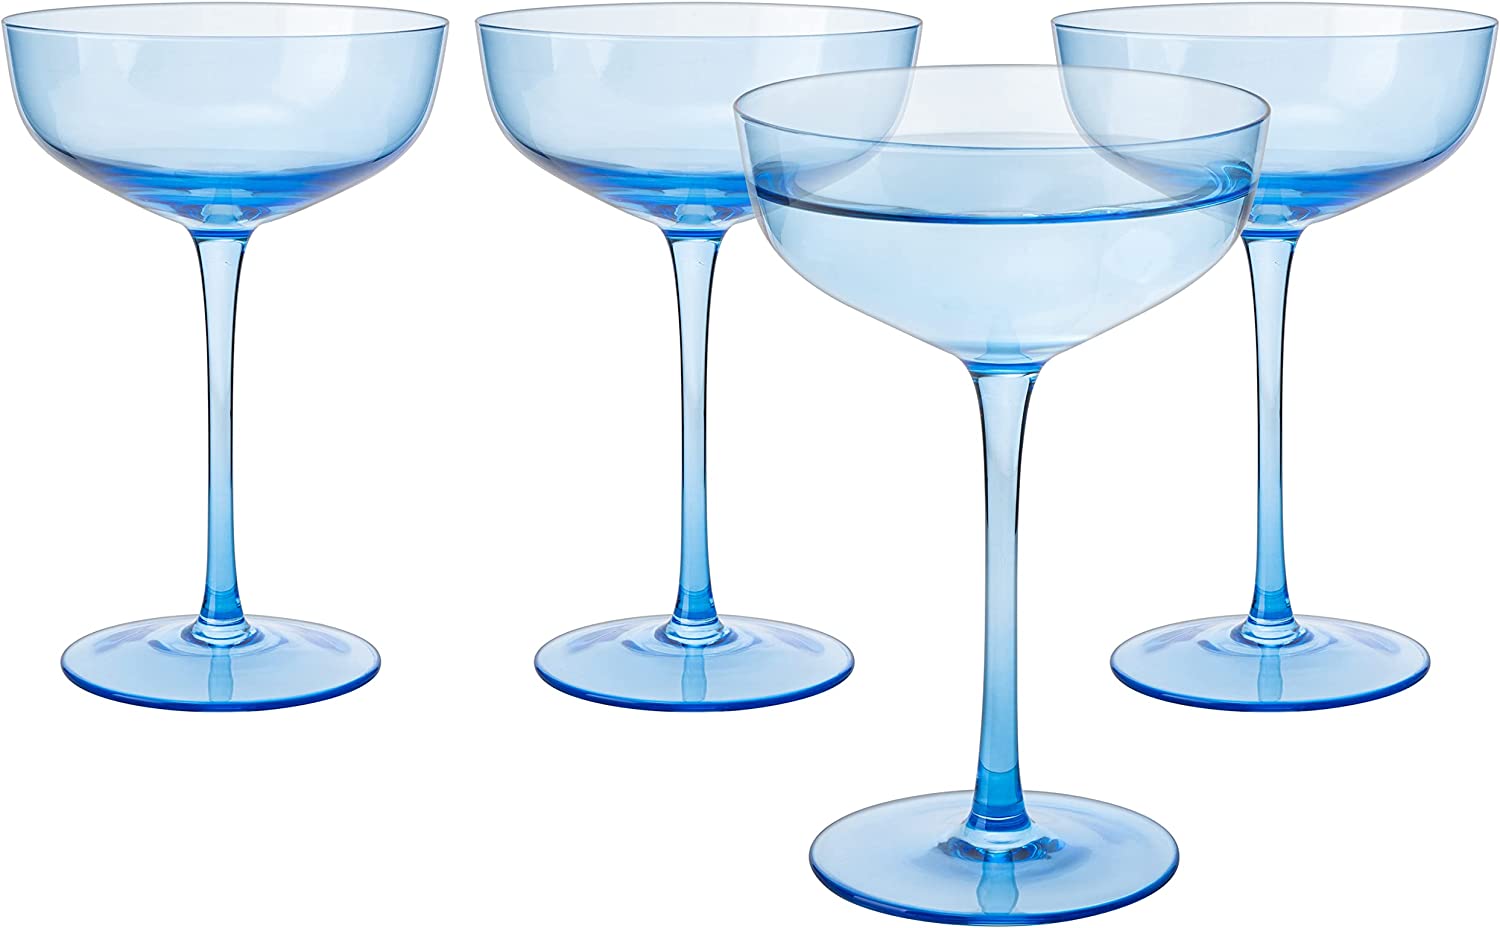 The Wine Savant Colored Coupe Glass | 7oz | Set of 4 Colorful Champagne & Cocktail Glasses, Fancy Manhattan, Crystal Martini, Cocktails Set, Margarita Bar Glassware Gift, Vintage (Blue)-3